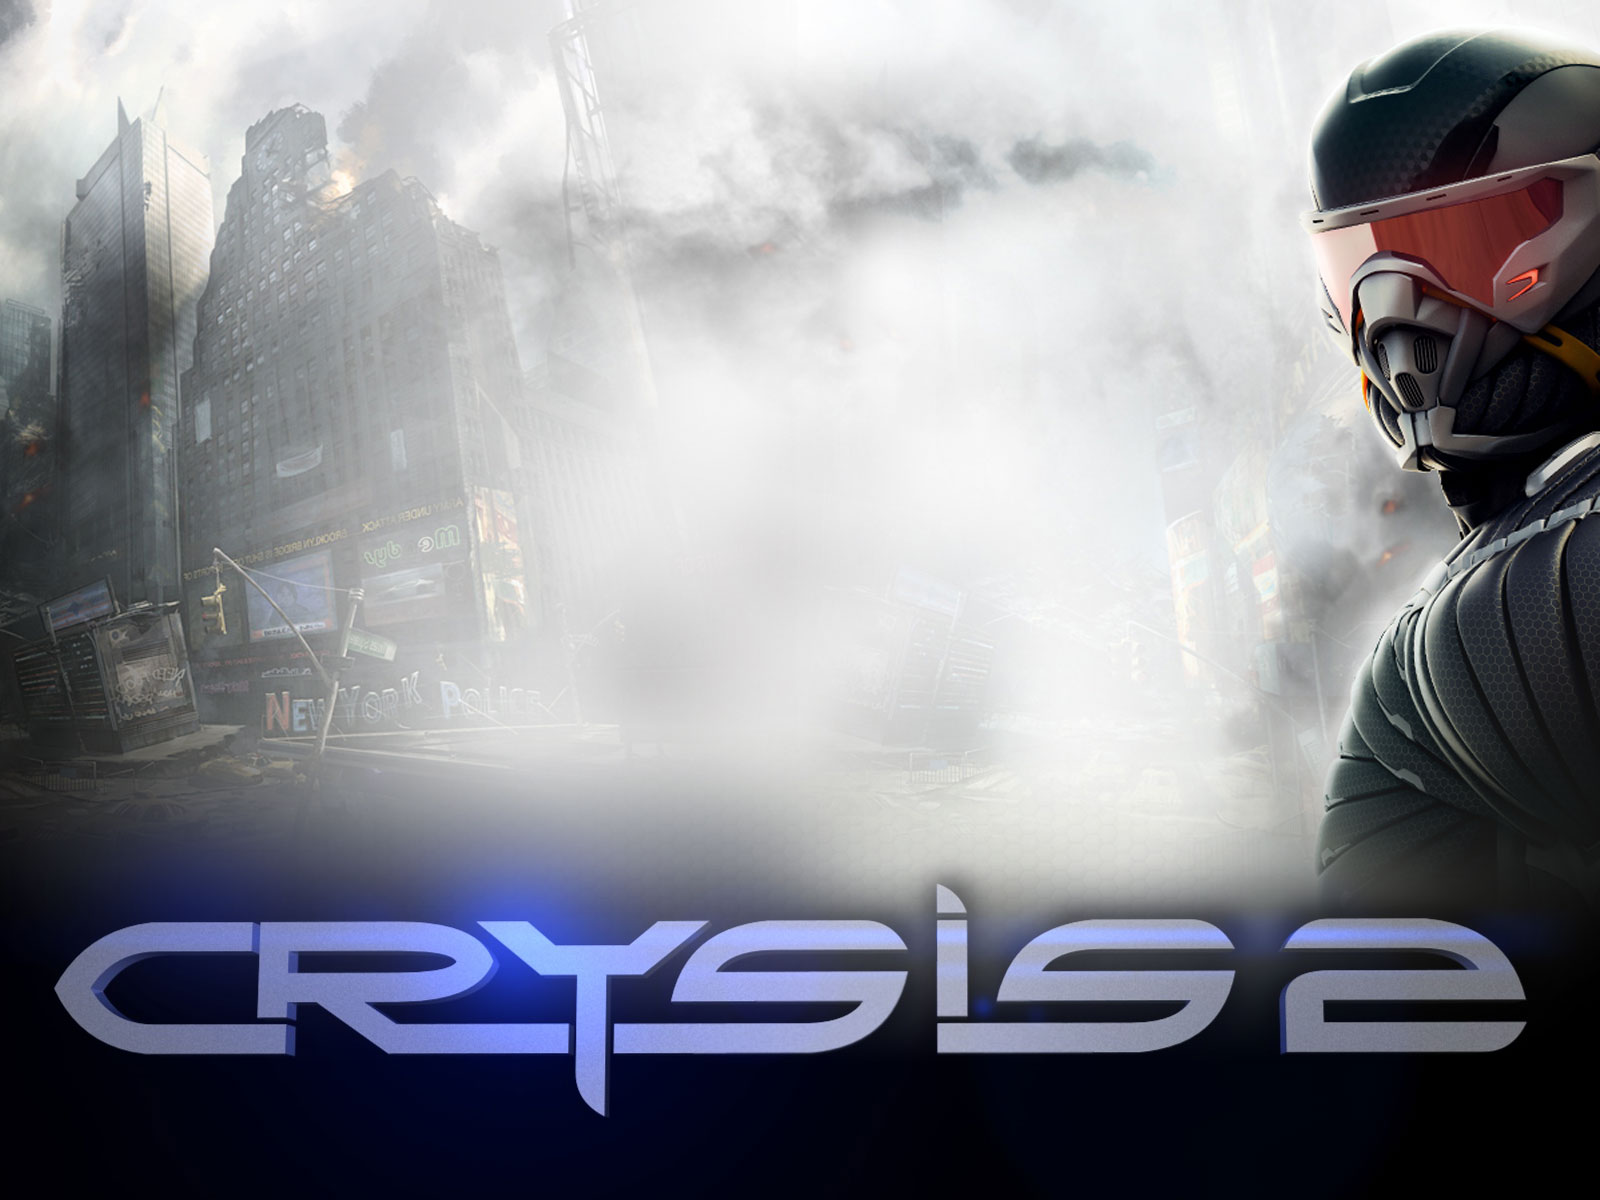 Download Normal Screen - Crysis 2 , HD Wallpaper & Backgrounds